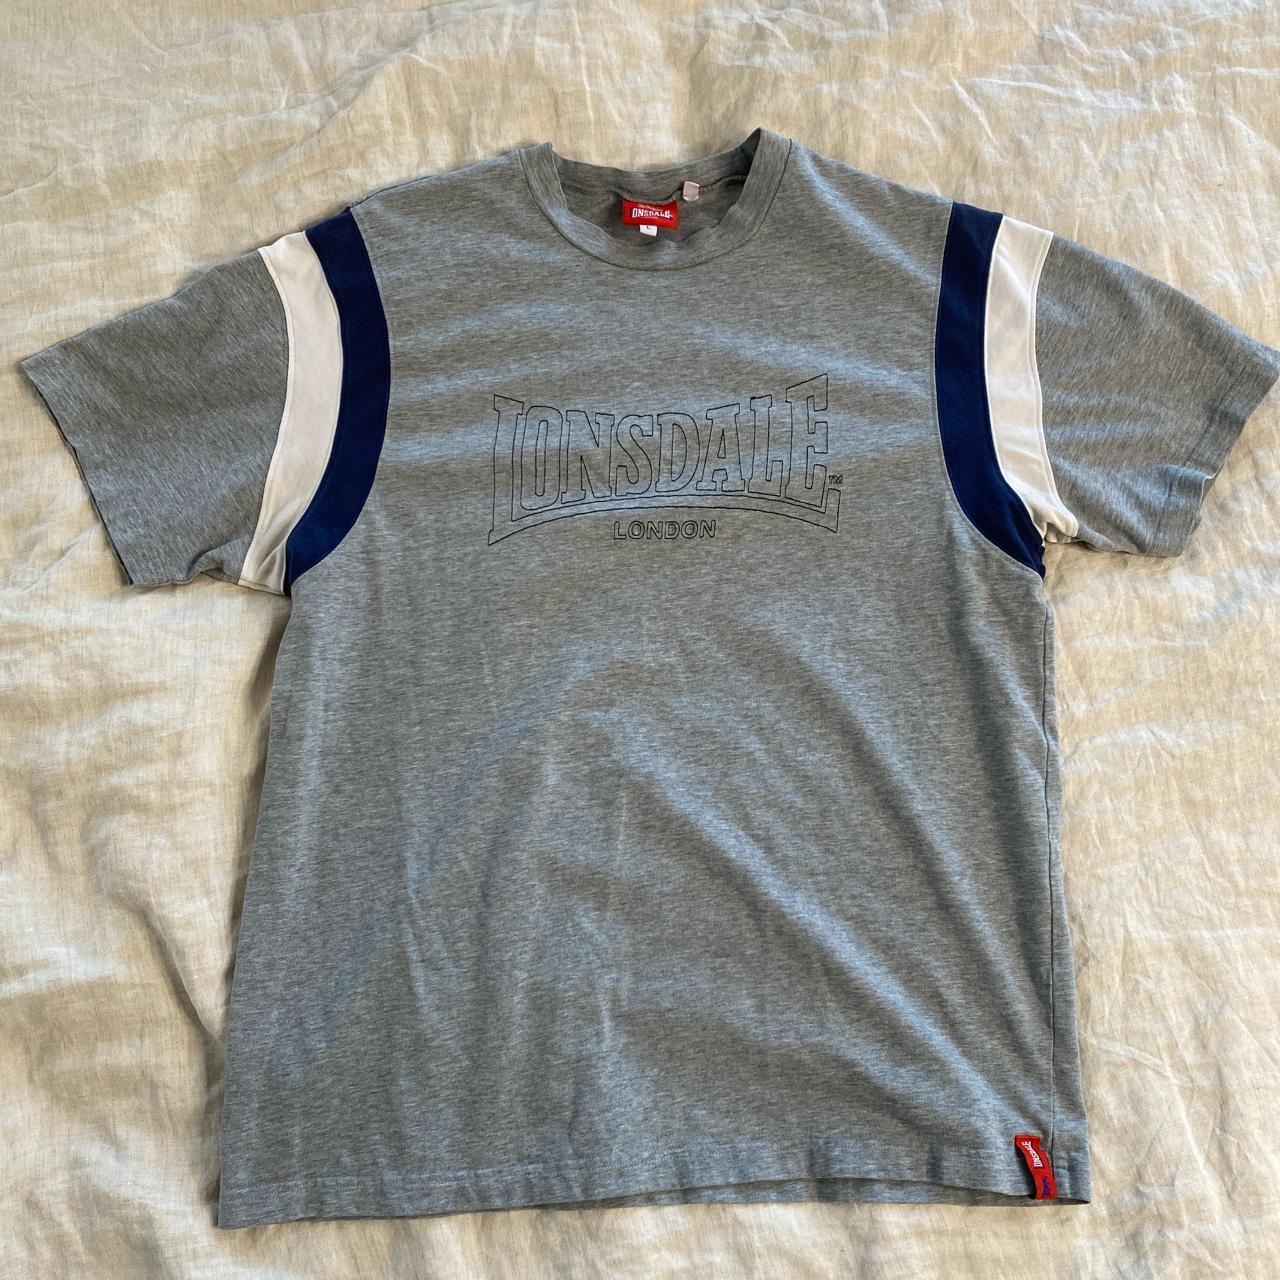 Lonsdale Men's Grey and Navy T-shirt